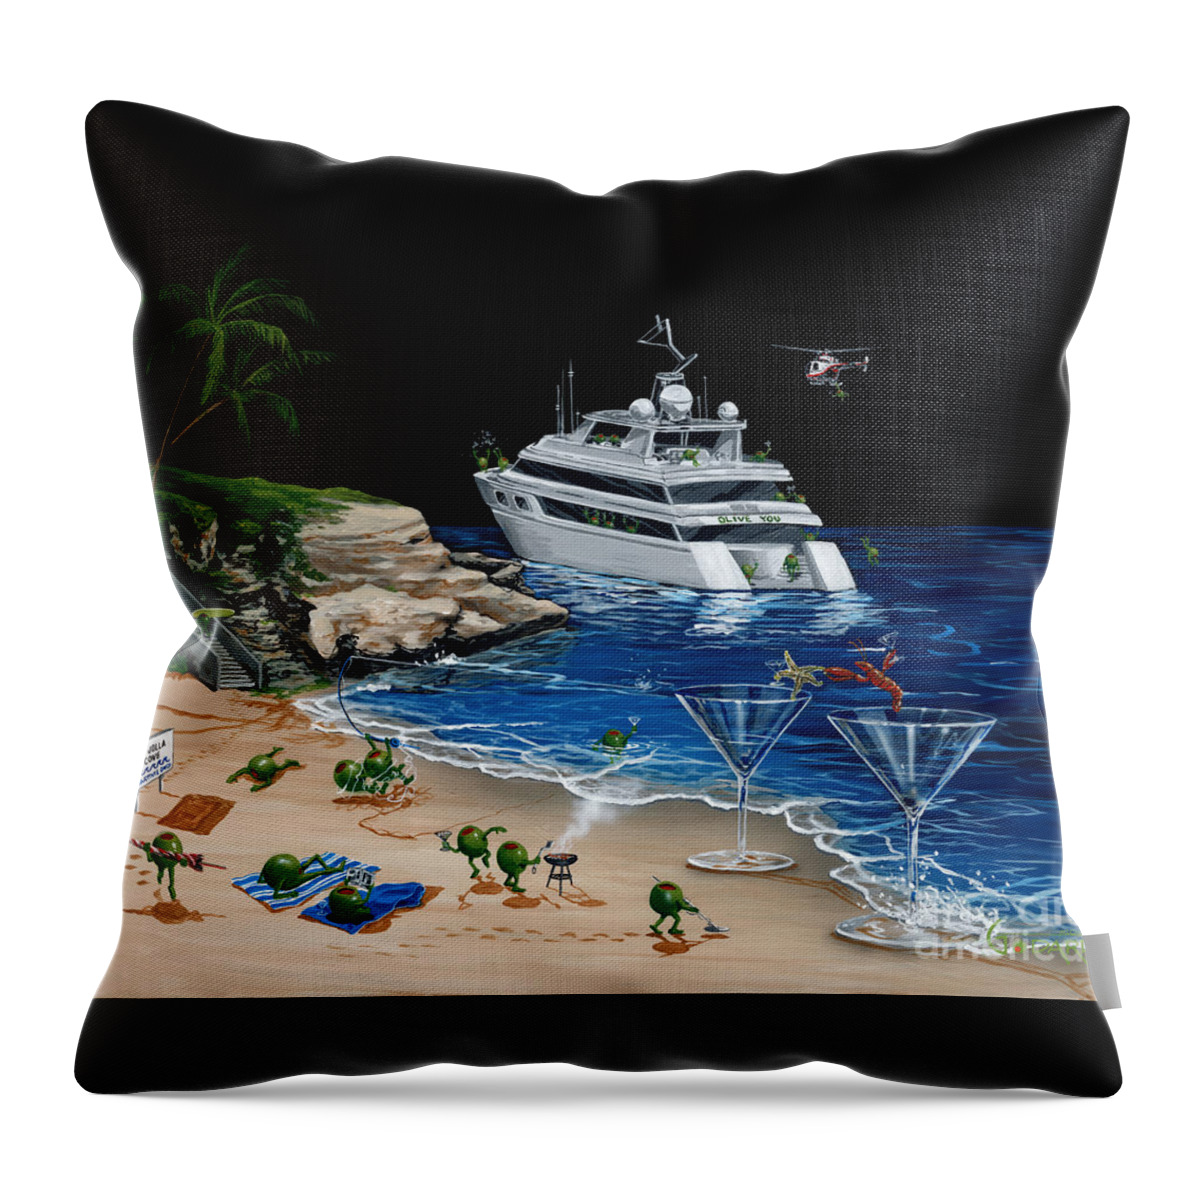 Taking A Break Throw Pillow featuring the painting Martini Cove La Jolla by Michael Godard